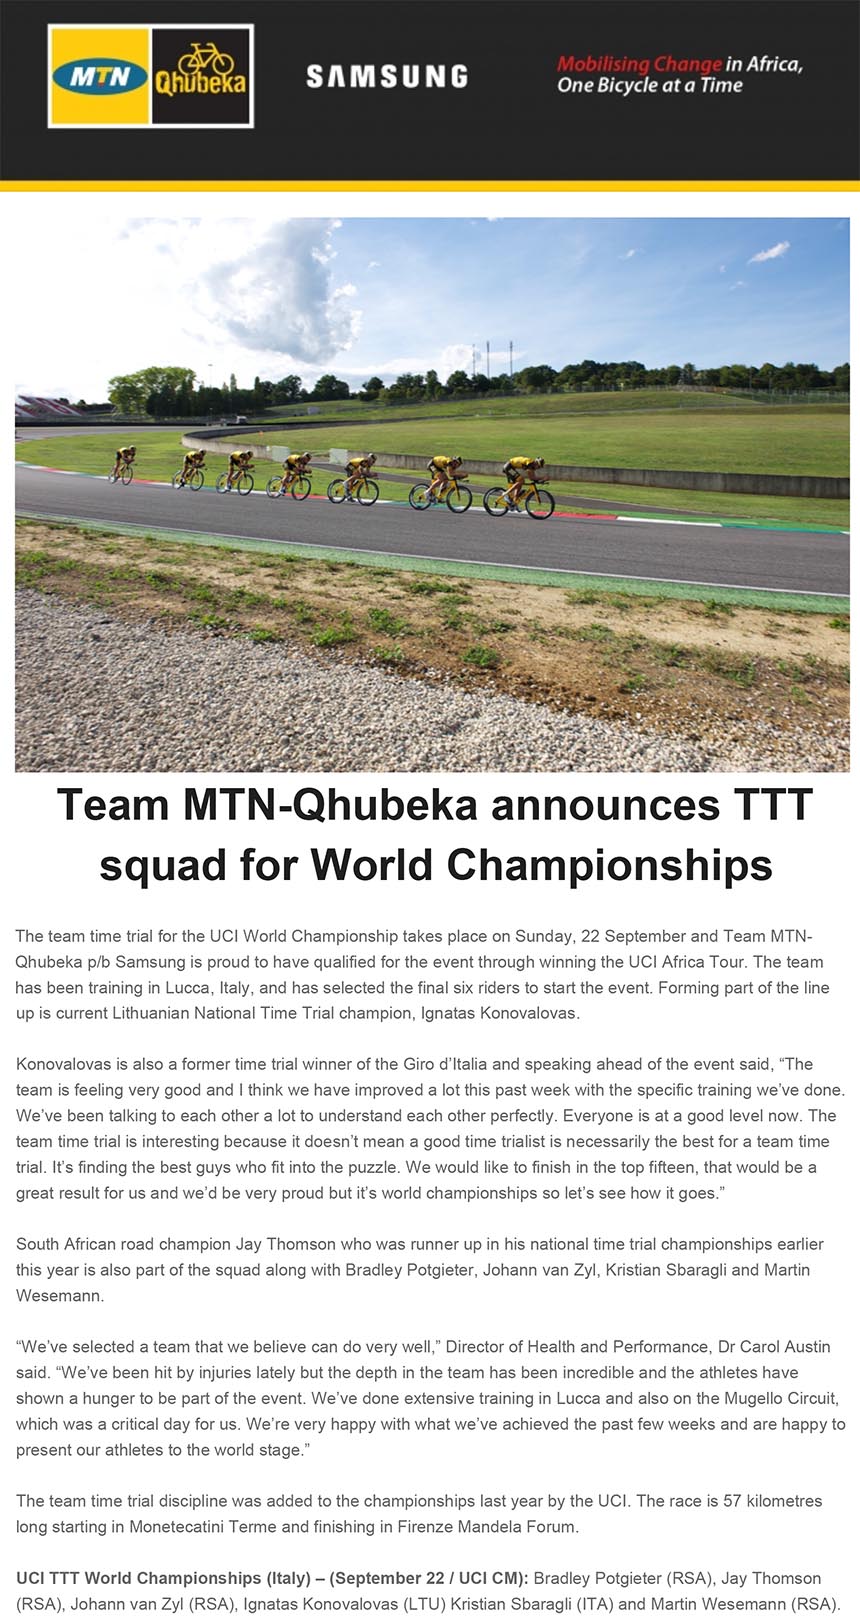 Team MTN-Qhubeka announces TTT
squad for World Championships
The team time trial for the UCI World Championship takes place on Sunday, 22 September and Team MTNQhubeka
p/b Samsung is proud to have qualified for the event through winning the UCI Africa Tour. The team
has been training in Lucca, Italy, and has selected the final six riders to start the event. Forming part of the line
bikenews@libero.it
A: redazione@bikenews.it
Rispondi a: "bikenews@libero.it" <bikenews@libero.it>
I: Team MTN-Qhubeka announces TTT squad for World Championships
20 settembre 2013 23:21
up is current Lithuanian National Time Trial champion, Ignatas Konovalovas.
Konovalovas is also a former time trial winner of the Giro d’Italia and speaking ahead of the event said, “The
team is feeling very good and I think we have improved a lot this past week with the specific training we’ve done.
We’ve been talking to each other a lot to understand each other perfectly. Everyone is at a good level now. The
team time trial is interesting because it doesn’t mean a good time trialist is necessarily the best for a team time
trial. It’s finding the best guys who fit into the puzzle. We would like to finish in the top fifteen, that would be a
great result for us and we’d be very proud but it’s world championships so let’s see how it goes.”
South African road champion Jay Thomson who was runner up in his national time trial championships earlier
this year is also part of the squad along with Bradley Potgieter, Johann van Zyl, Kristian Sbaragli and Martin
Wesemann.
“We’ve selected a team that we believe can do very well,” Director of Health and Performance, Dr Carol Austin
said. “We’ve been hit by injuries lately but the depth in the team has been incredible and the athletes have
shown a hunger to be part of the event. We’ve done extensive training in Lucca and also on the Mugello Circuit,
which was a critical day for us. We’re very happy with what we’ve achieved the past few weeks and are happy to
present our athletes to the world stage.”
The team time trial discipline was added to the championships last year by the UCI. The race is 57 kilometres
long starting in Monetecatini Terme and finishing in Firenze Mandela Forum.
UCI TTT World Championships (Italy) – (September 22 / UCI CM): Bradley Potgieter (RSA), Jay Thomson
(RSA), Johann van Zyl (RSA), Ignatas Konovalovas (LTU) Kristian Sbaragli (ITA) and Martin Wesemann (RSA).
follow on Twitter | friend on Facebook | forward to a friend
Copyright ©